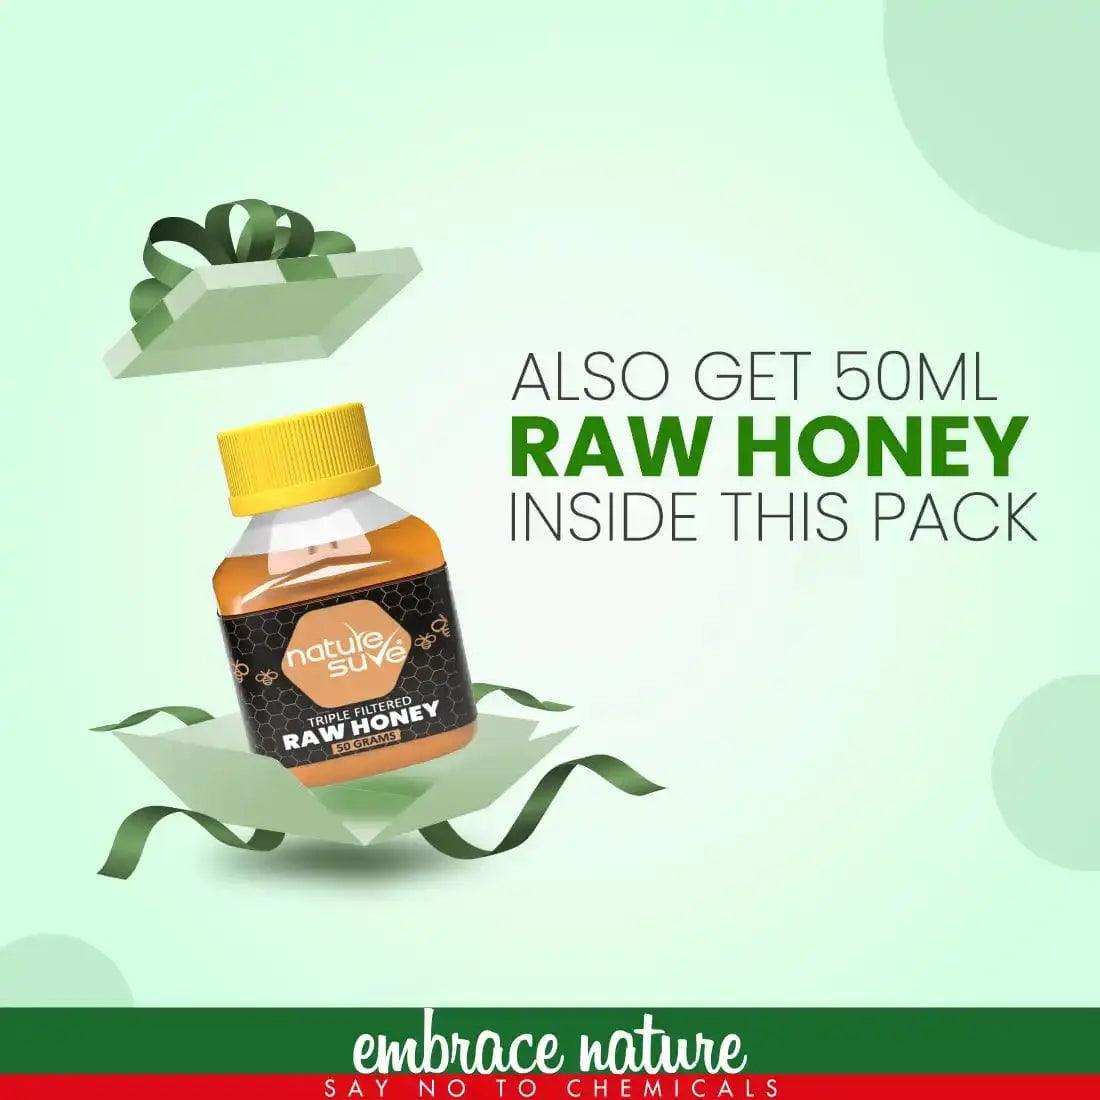 When you buy 200 grams Nature Sure Moringa Leaf Powder, you also get 50 grams raw honey absolutely free